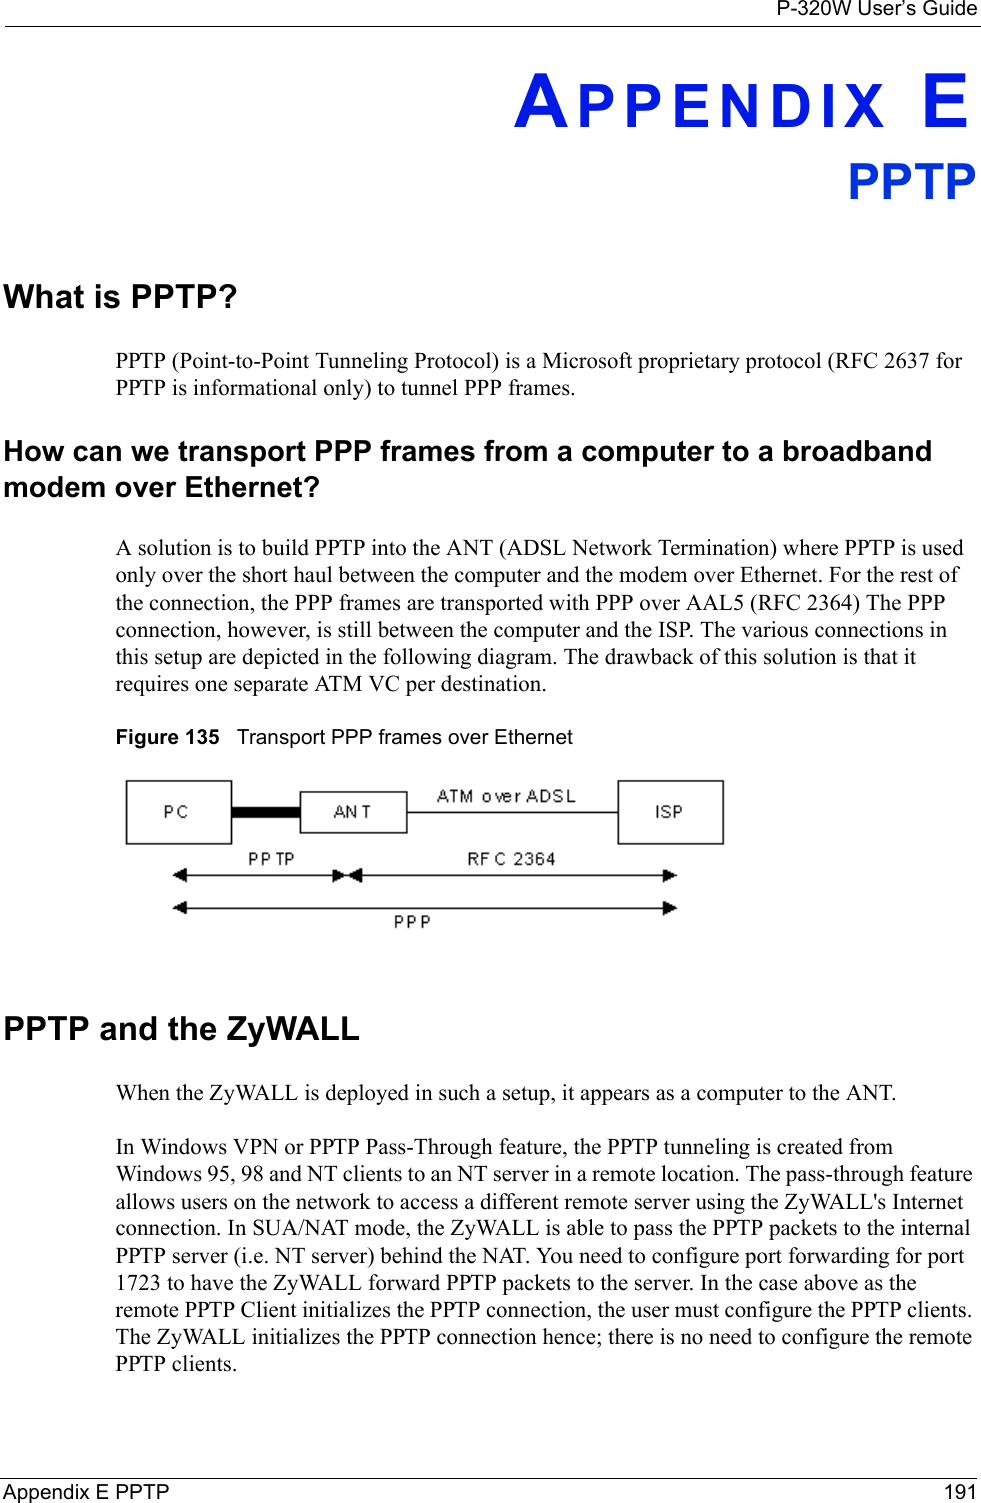 P-320W User’s GuideAppendix E PPTP 191APPENDIX EPPTPWhat is PPTP?PPTP (Point-to-Point Tunneling Protocol) is a Microsoft proprietary protocol (RFC 2637 for PPTP is informational only) to tunnel PPP frames. How can we transport PPP frames from a computer to a broadband modem over Ethernet?A solution is to build PPTP into the ANT (ADSL Network Termination) where PPTP is used only over the short haul between the computer and the modem over Ethernet. For the rest of the connection, the PPP frames are transported with PPP over AAL5 (RFC 2364) The PPP connection, however, is still between the computer and the ISP. The various connections in this setup are depicted in the following diagram. The drawback of this solution is that it requires one separate ATM VC per destination. Figure 135   Transport PPP frames over Ethernet PPTP and the ZyWALLWhen the ZyWALL is deployed in such a setup, it appears as a computer to the ANT.In Windows VPN or PPTP Pass-Through feature, the PPTP tunneling is created from Windows 95, 98 and NT clients to an NT server in a remote location. The pass-through feature allows users on the network to access a different remote server using the ZyWALL&apos;s Internet connection. In SUA/NAT mode, the ZyWALL is able to pass the PPTP packets to the internal PPTP server (i.e. NT server) behind the NAT. You need to configure port forwarding for port 1723 to have the ZyWALL forward PPTP packets to the server. In the case above as the remote PPTP Client initializes the PPTP connection, the user must configure the PPTP clients. The ZyWALL initializes the PPTP connection hence; there is no need to configure the remote PPTP clients. 